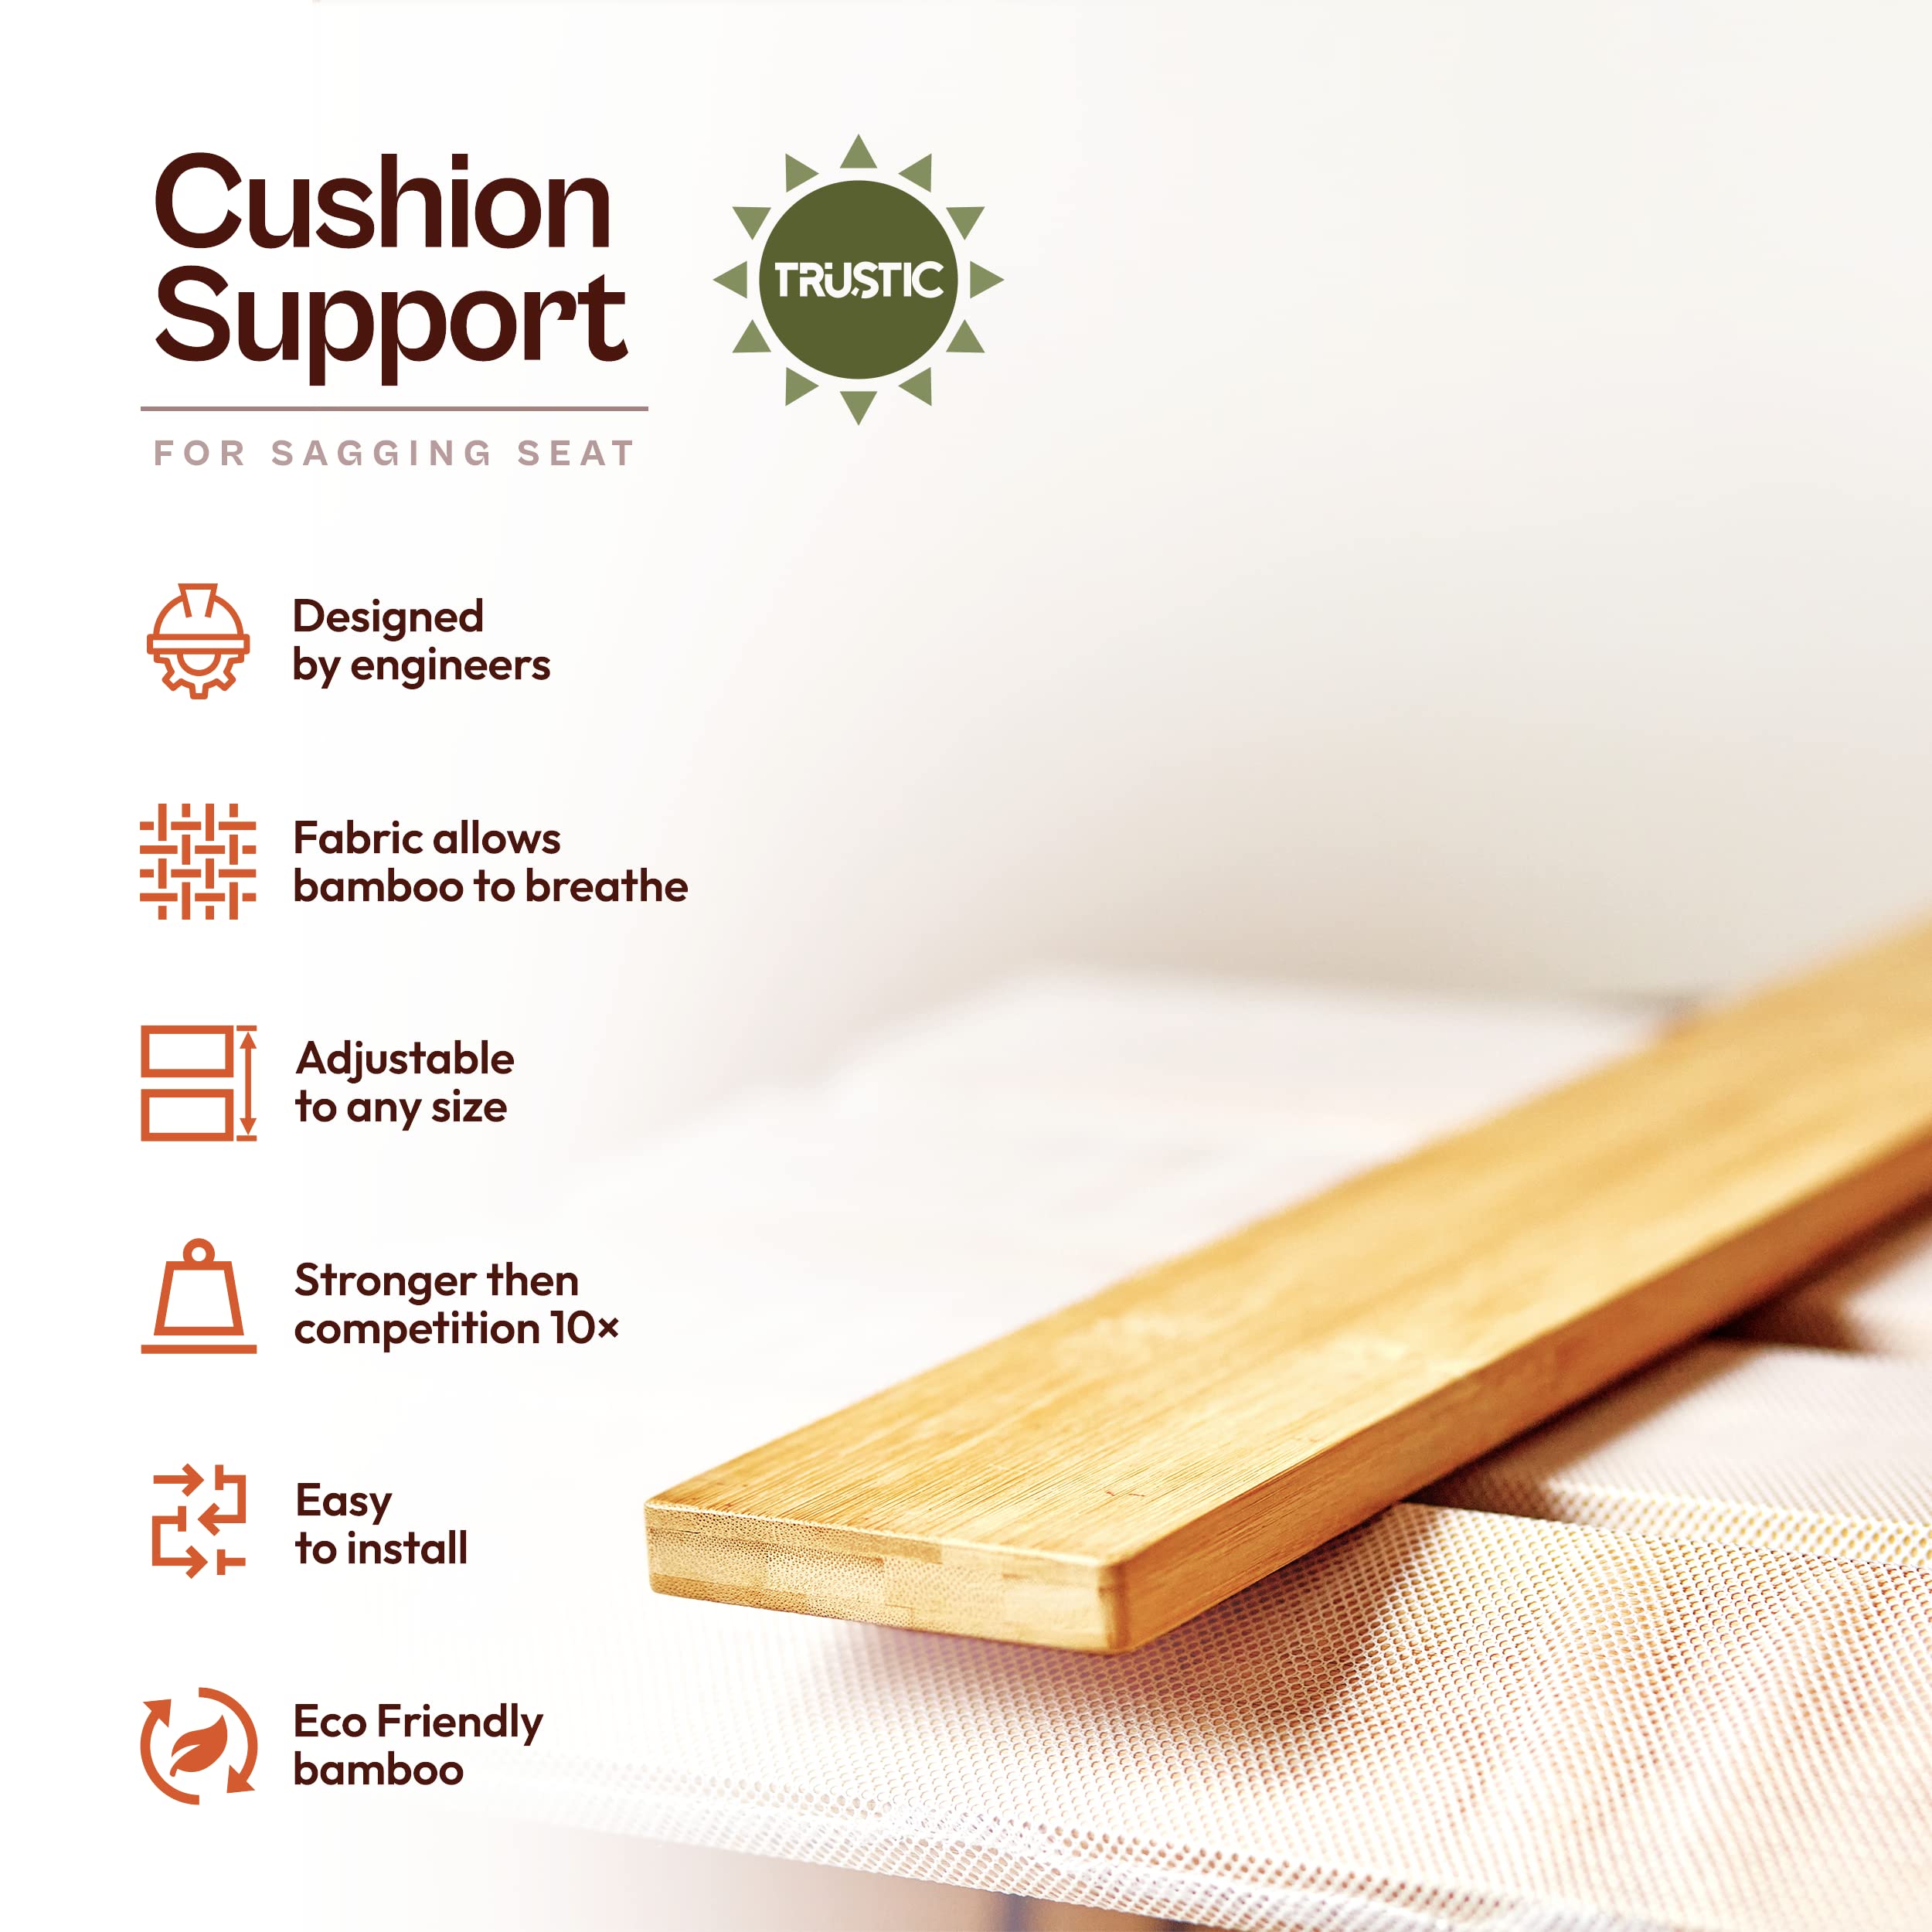 Trustic - Adjustable Bamboo Cushion Support - Furniture Sagging Fix, Size 21"x 22"  - Good